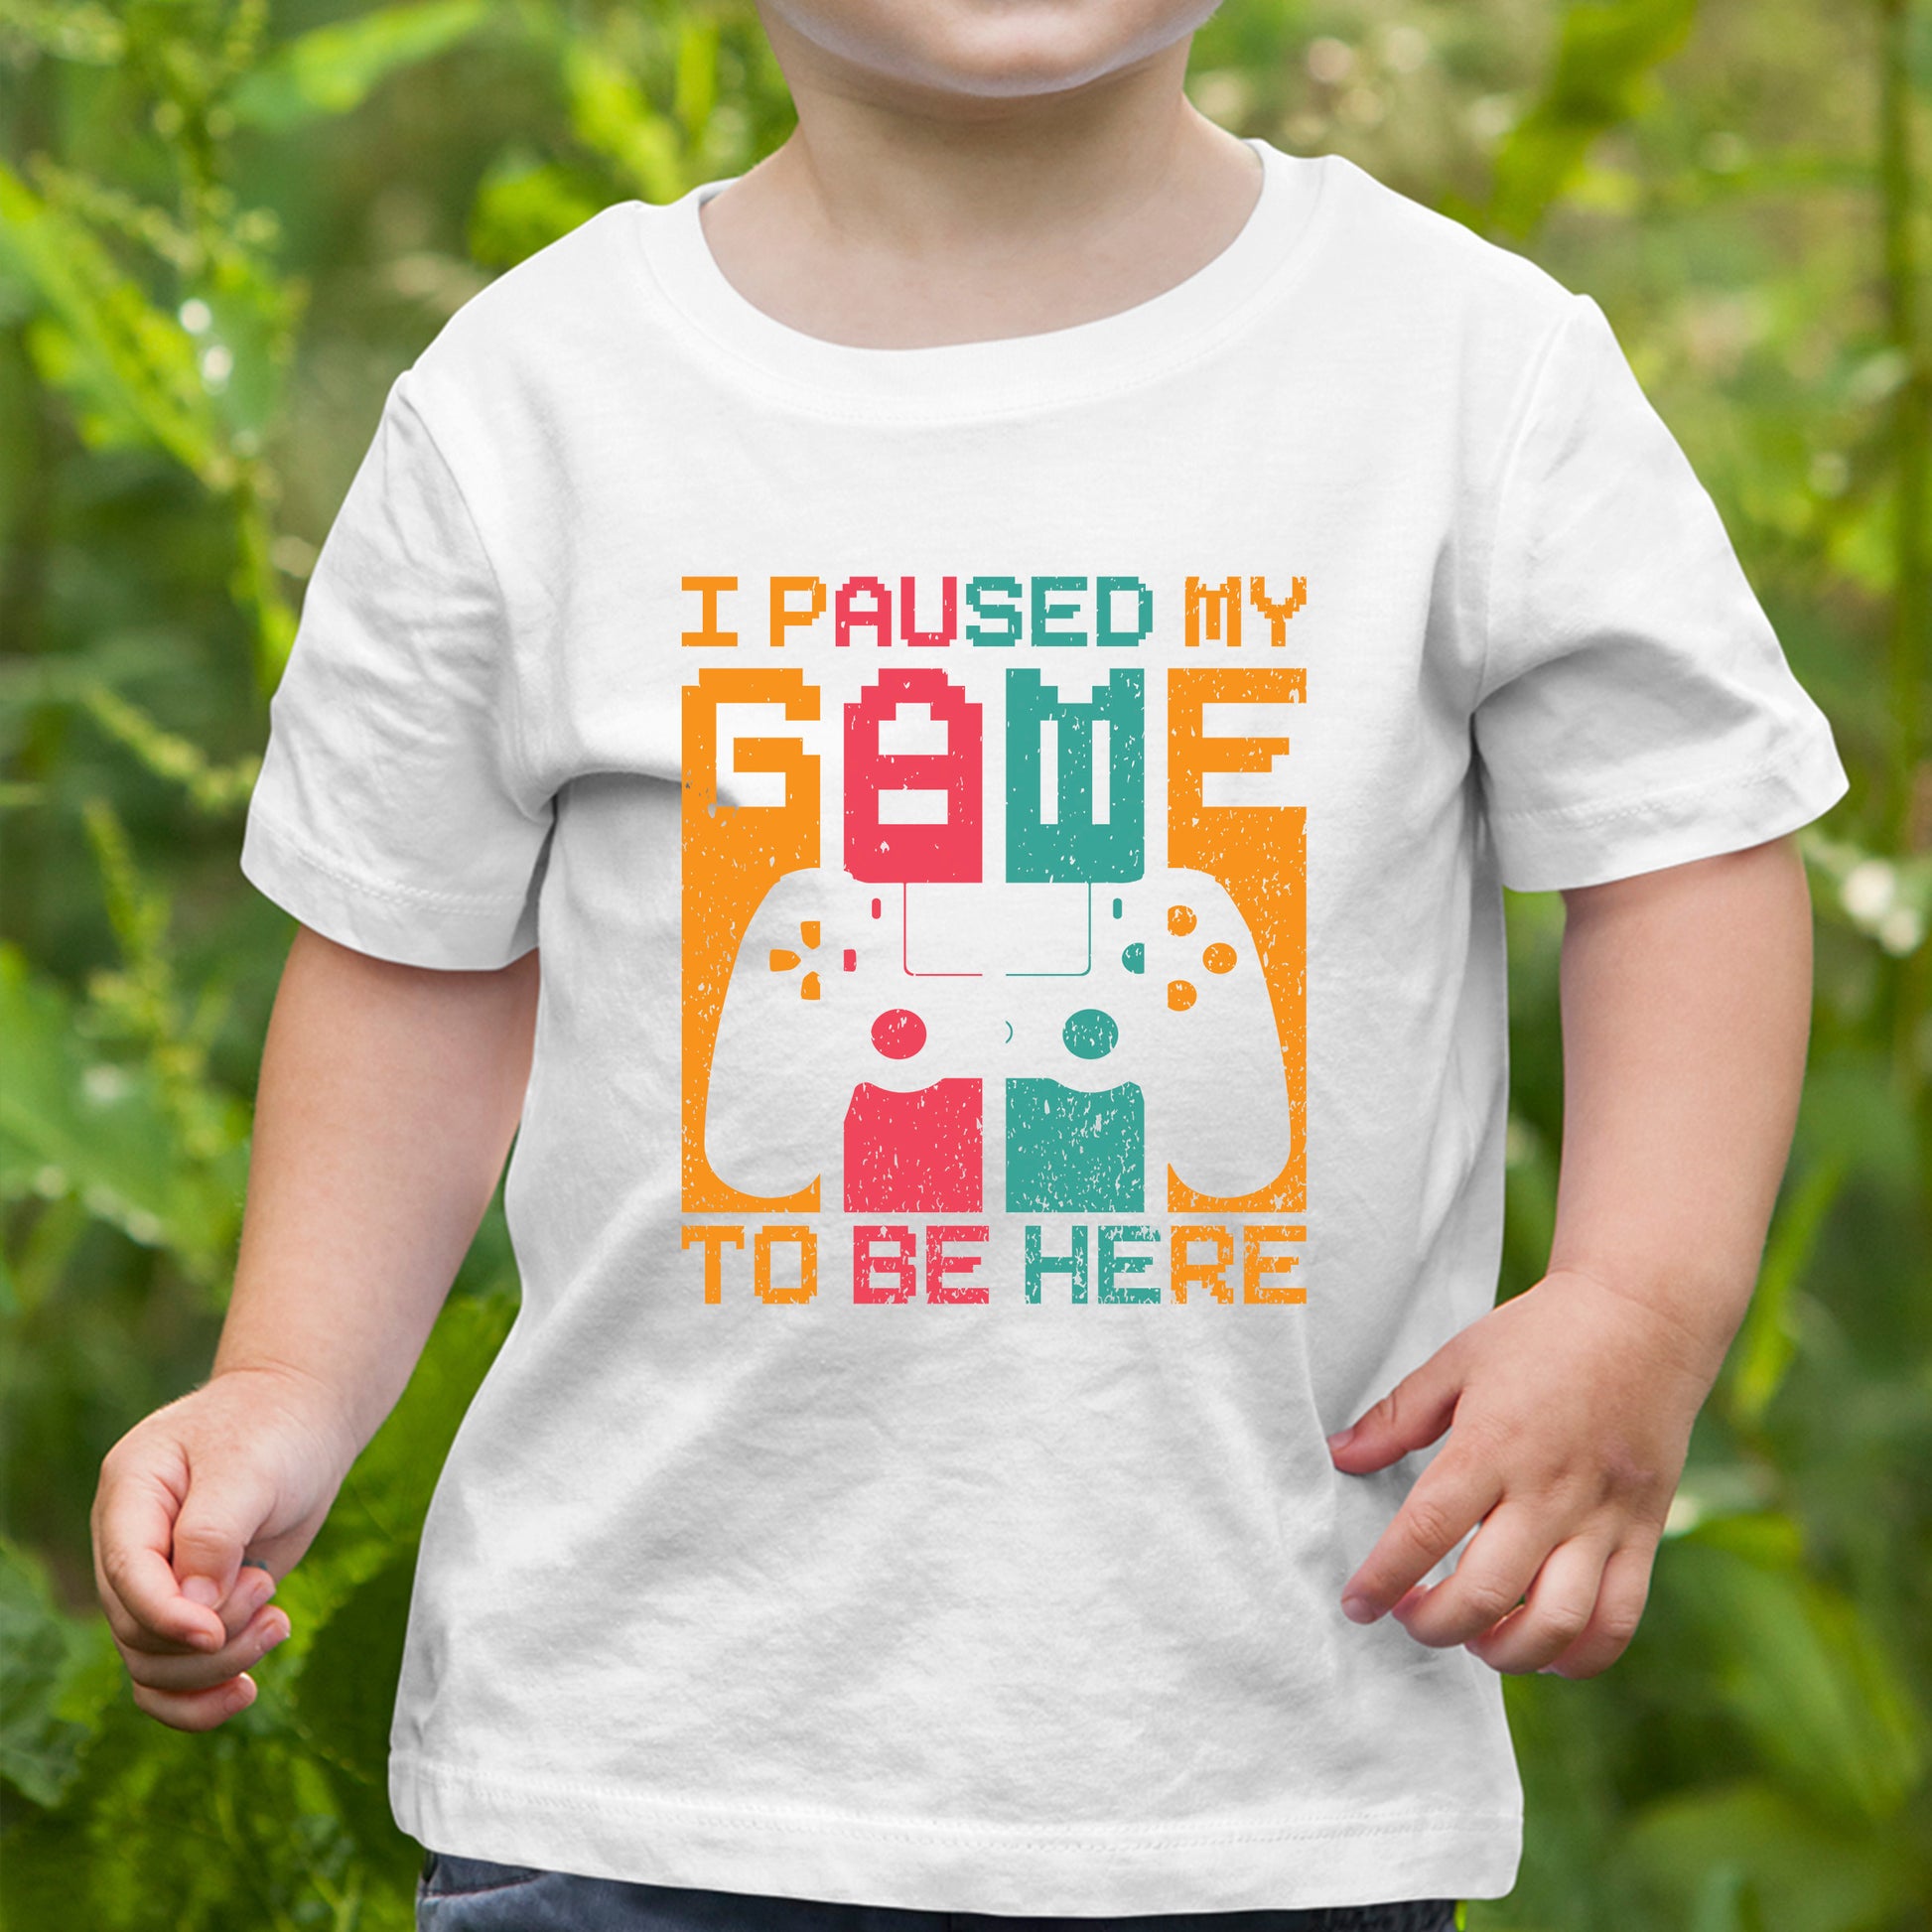 I paused my game to be here kids shirt